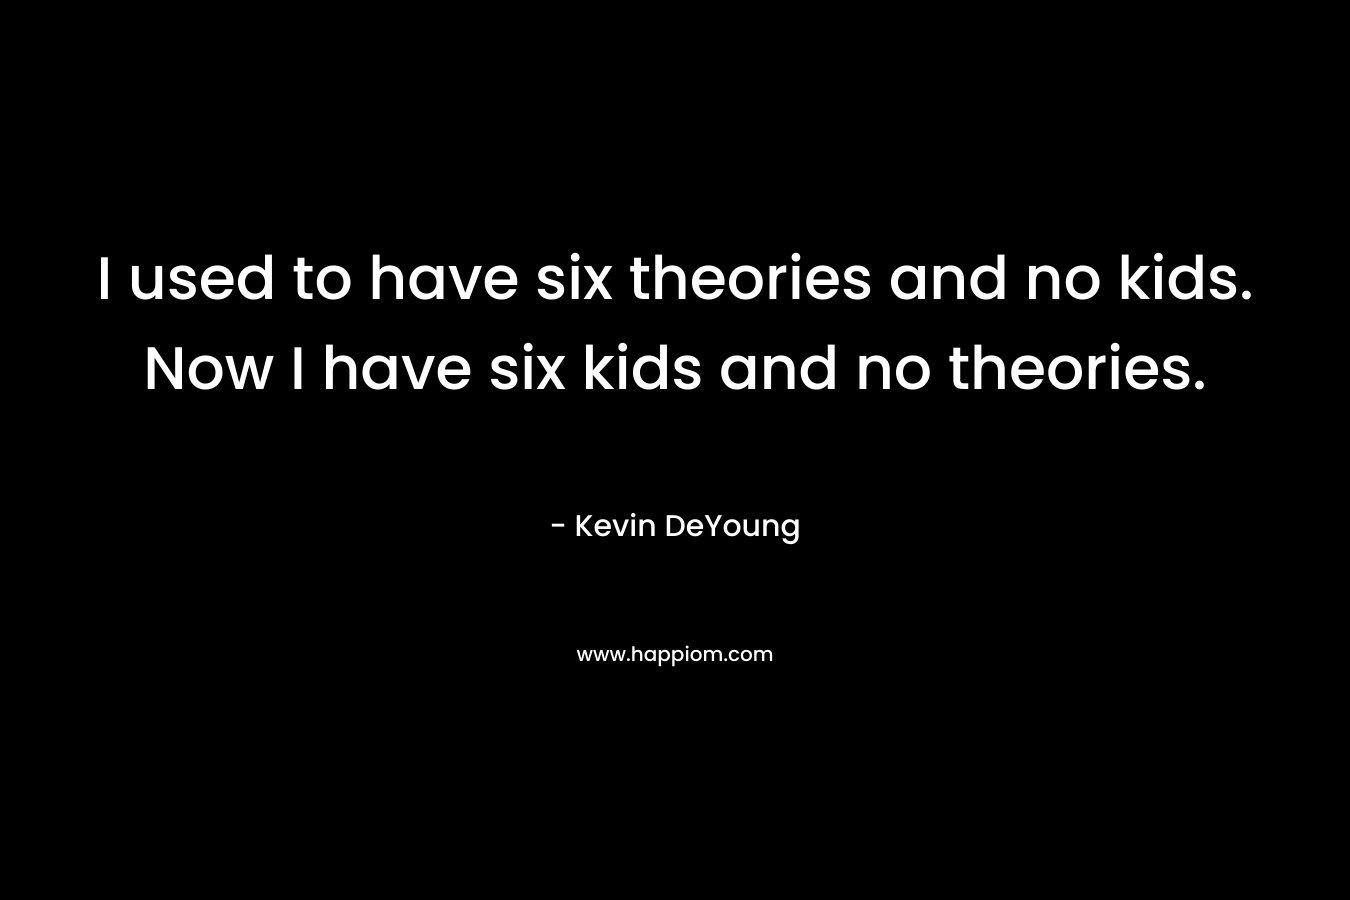 I used to have six theories and no kids. Now I have six kids and no theories.